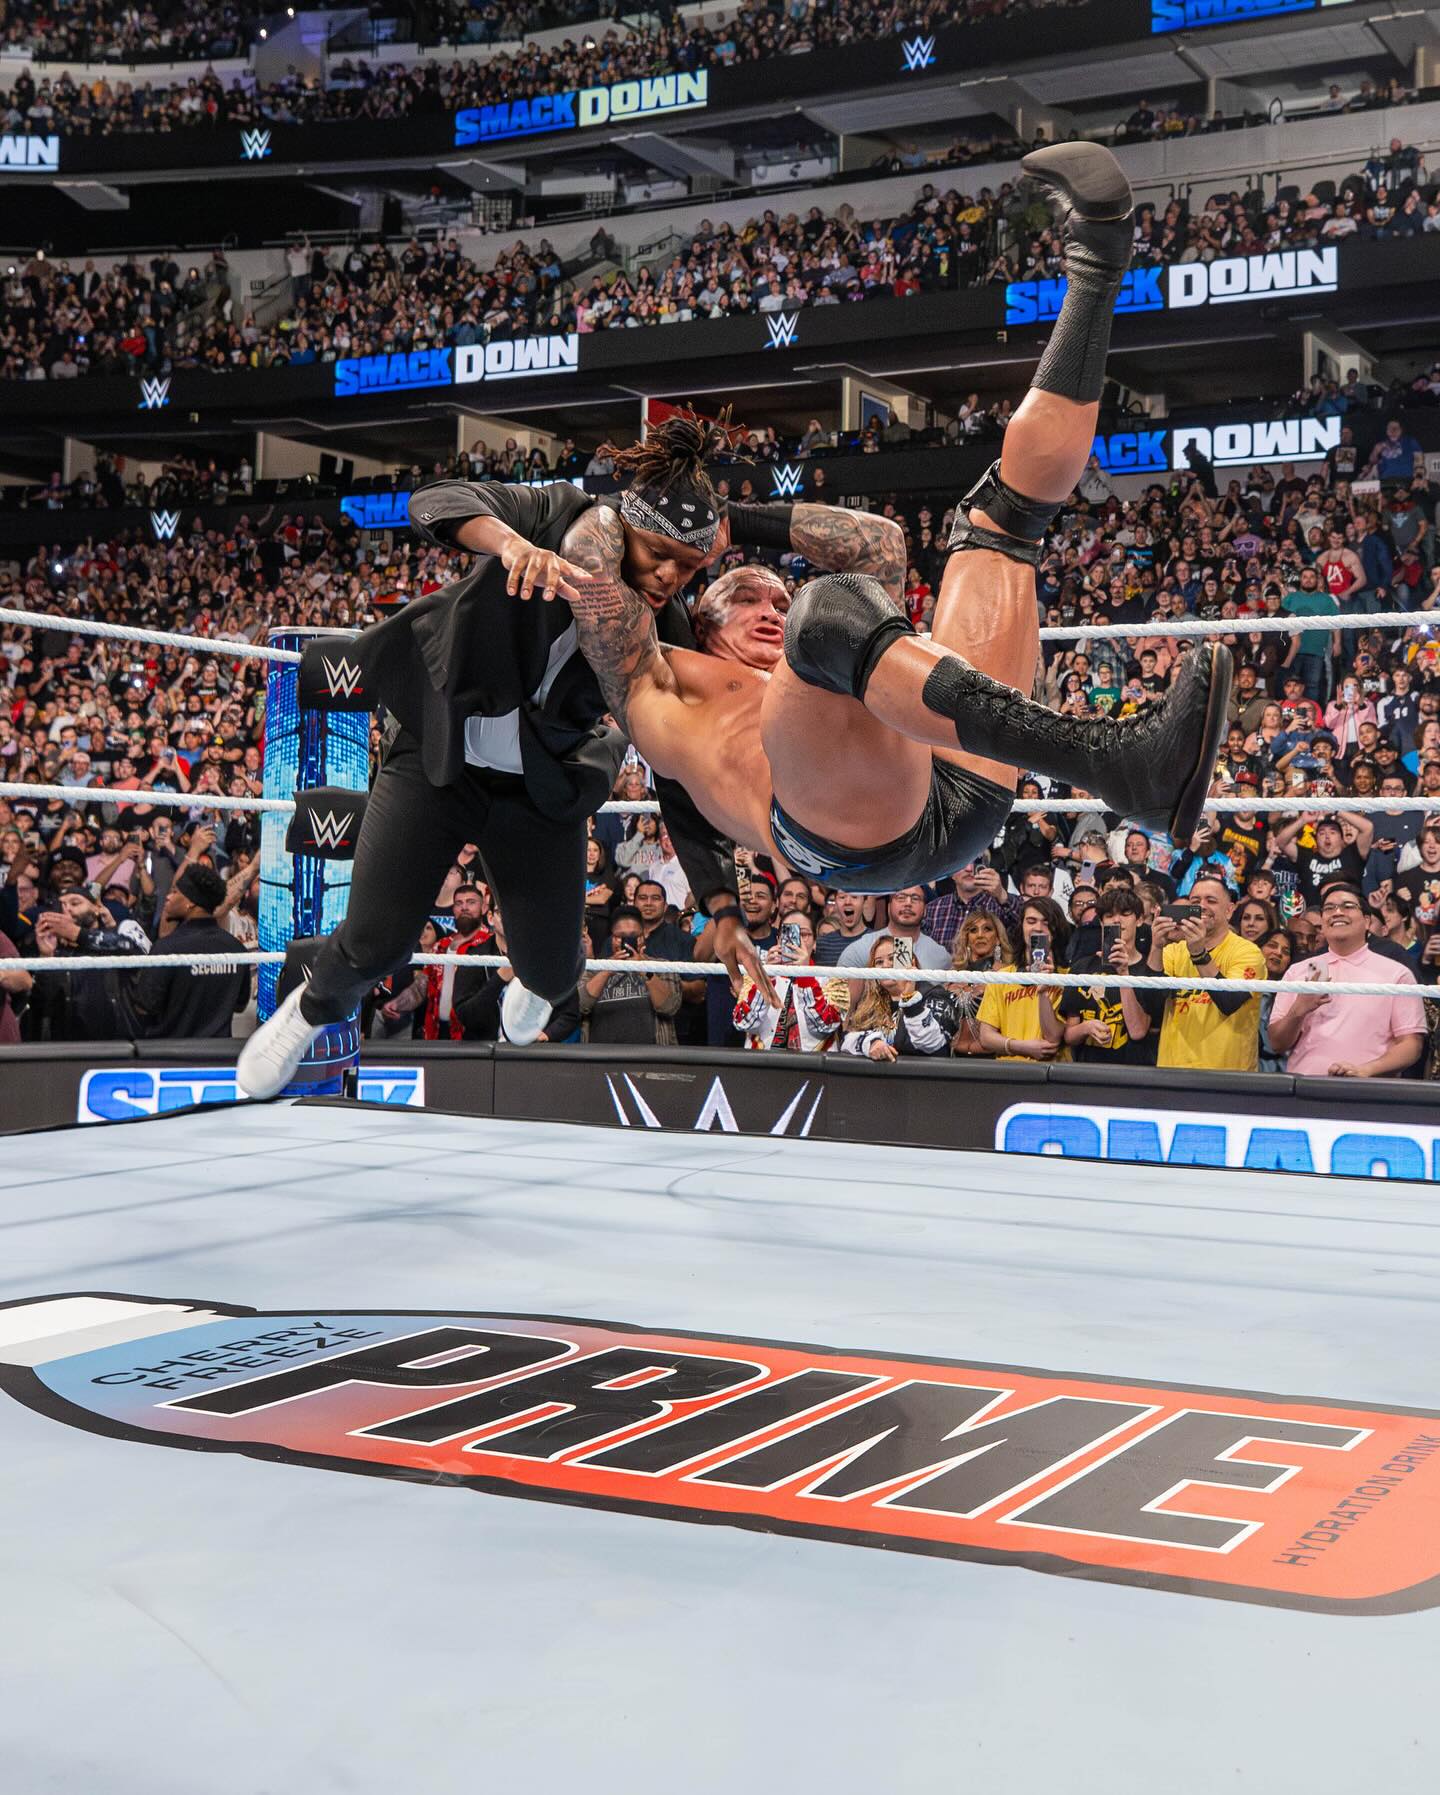 Orton RKO'd KSI just inches away from his PRIME logo after Paul ran away